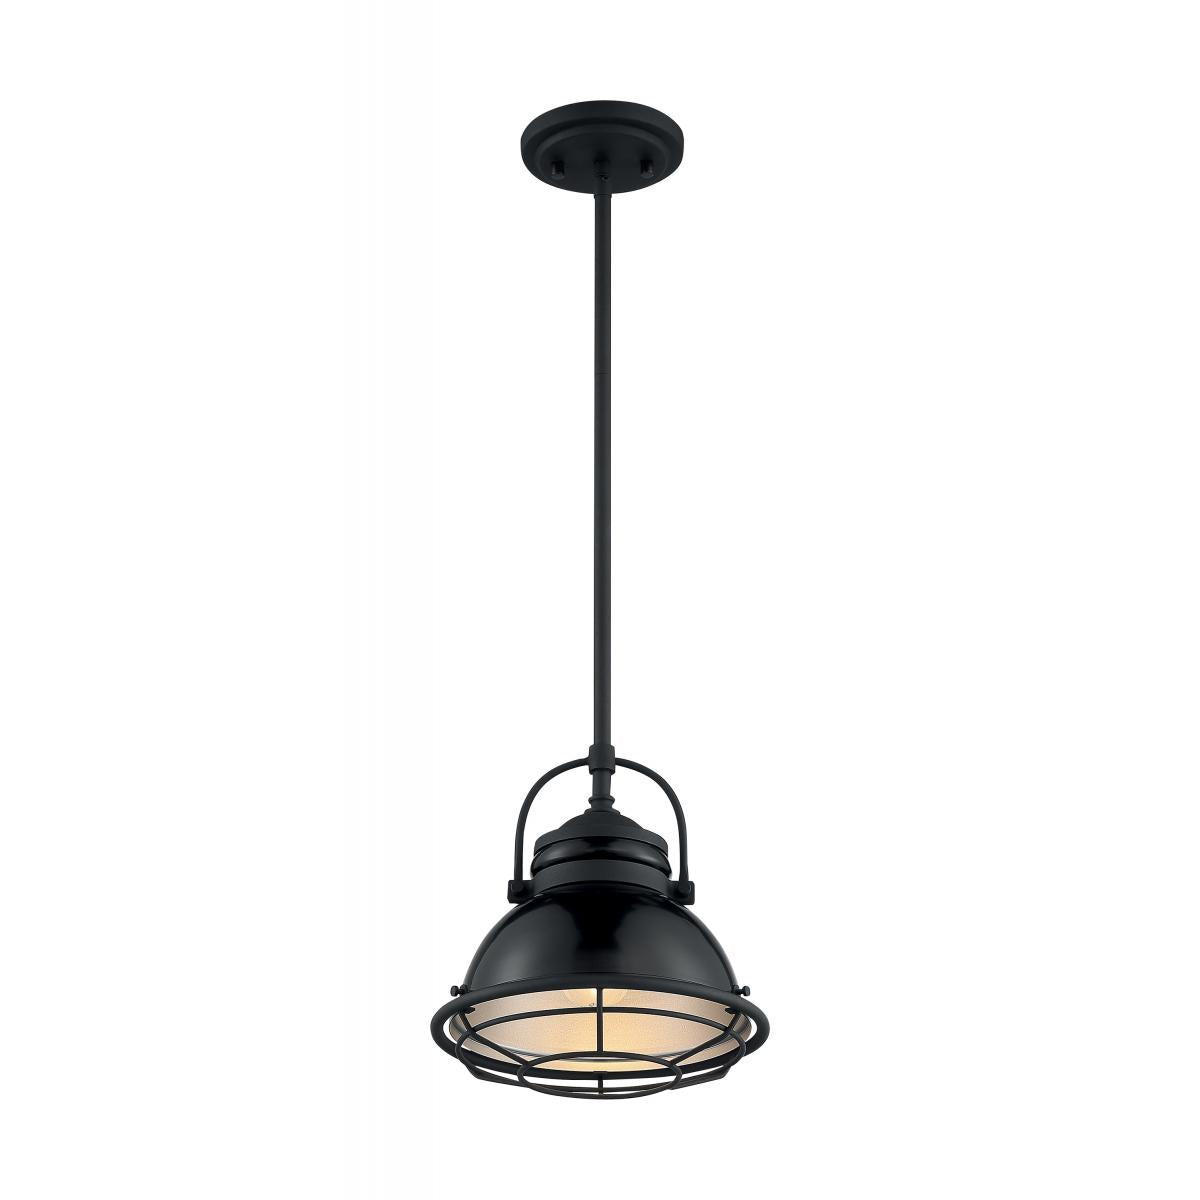 Upton 1 Light Pendant with Black and Silver & Black Accents Finish